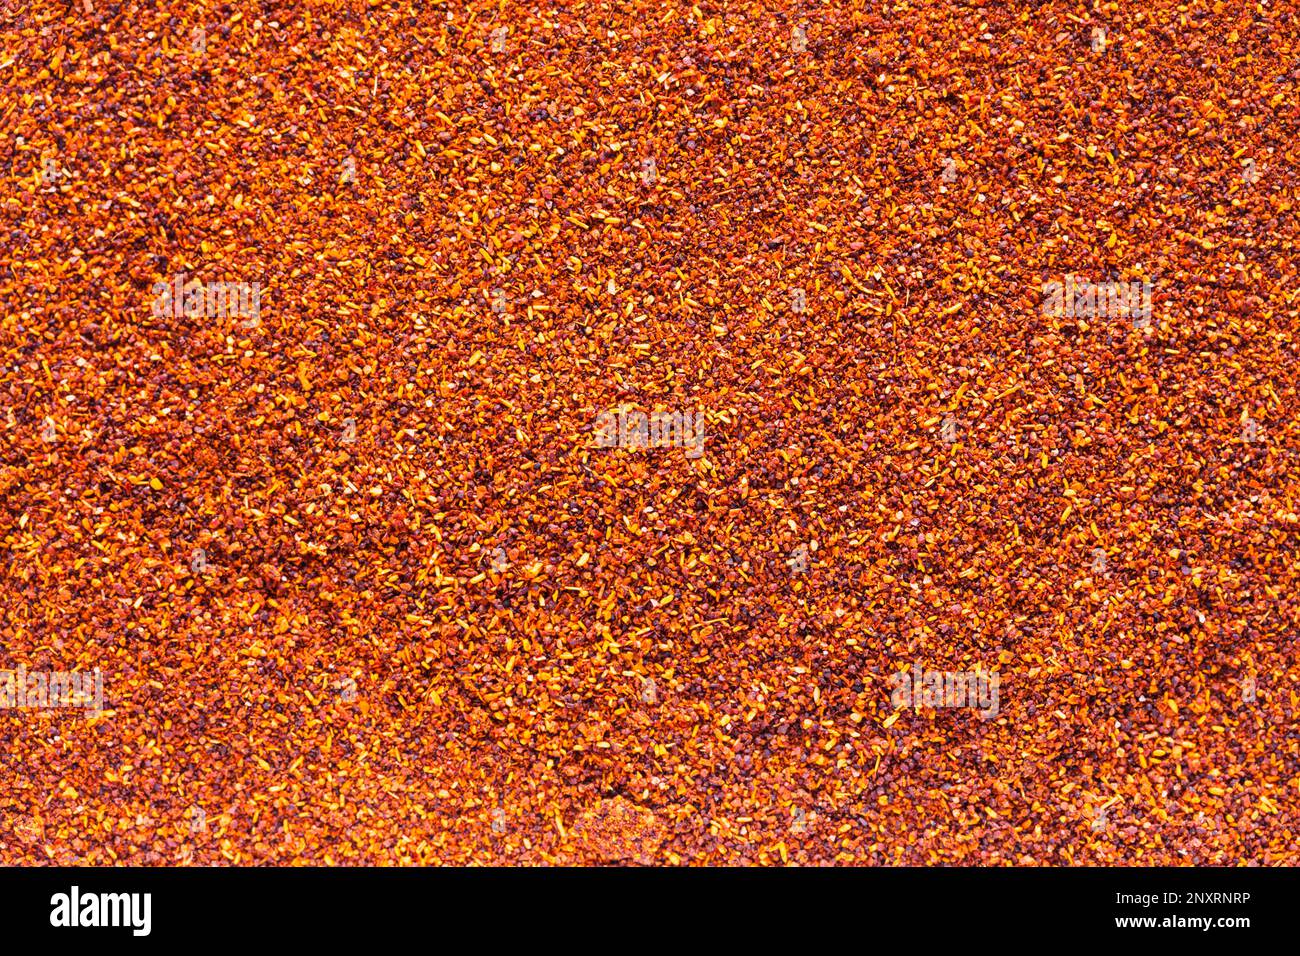 Dry Red Chili Powder Spice Heap Background. Stock Photo